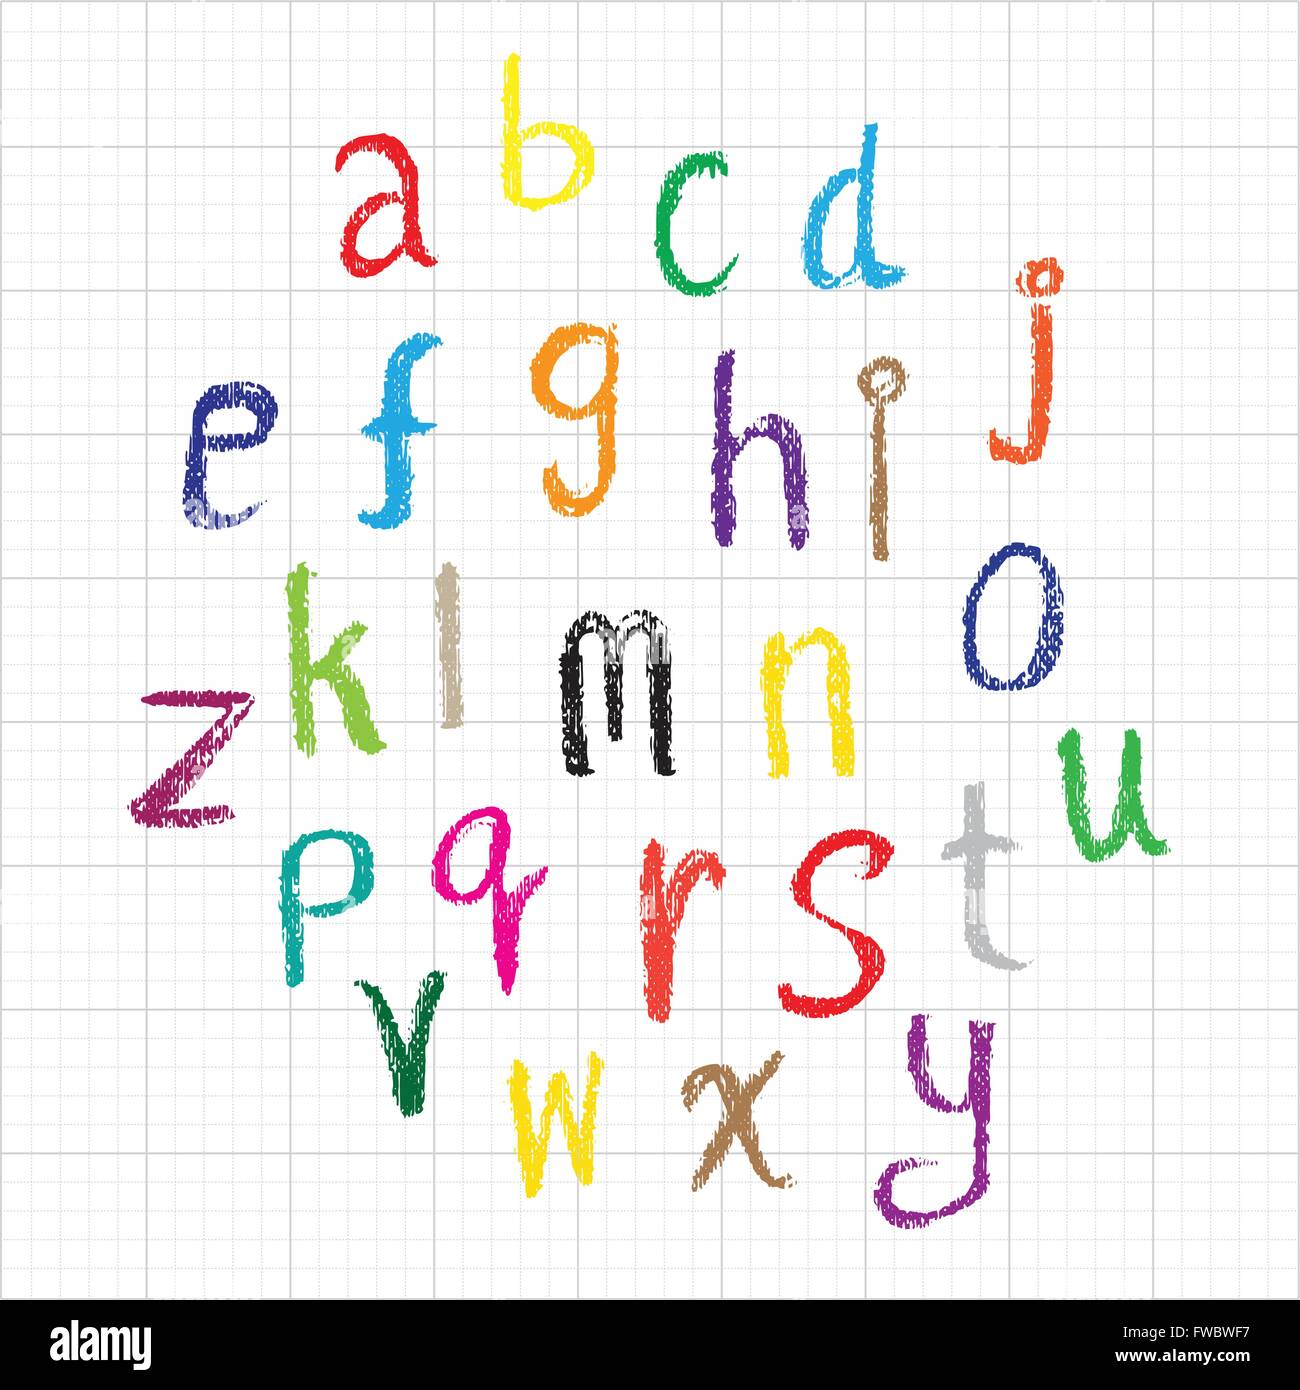 Child drawing of alphabet font made with wax crayons Stock Vector